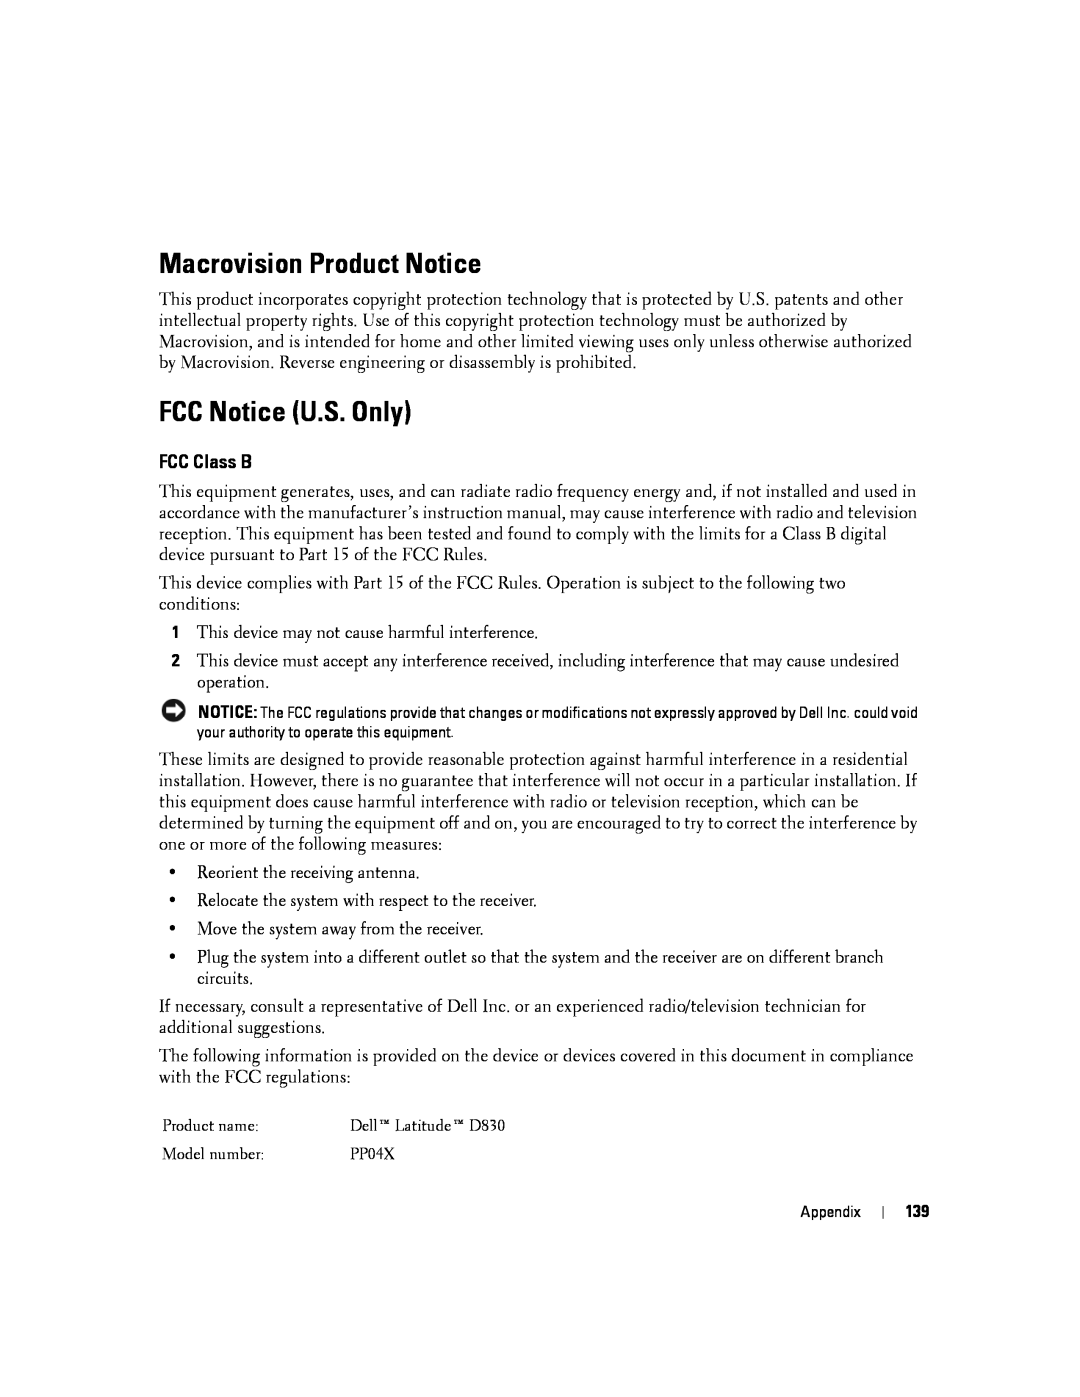 Dell D830, PP04X manual Macrovision Product Notice, FCC Notice U.S. Only, FCC Class B 